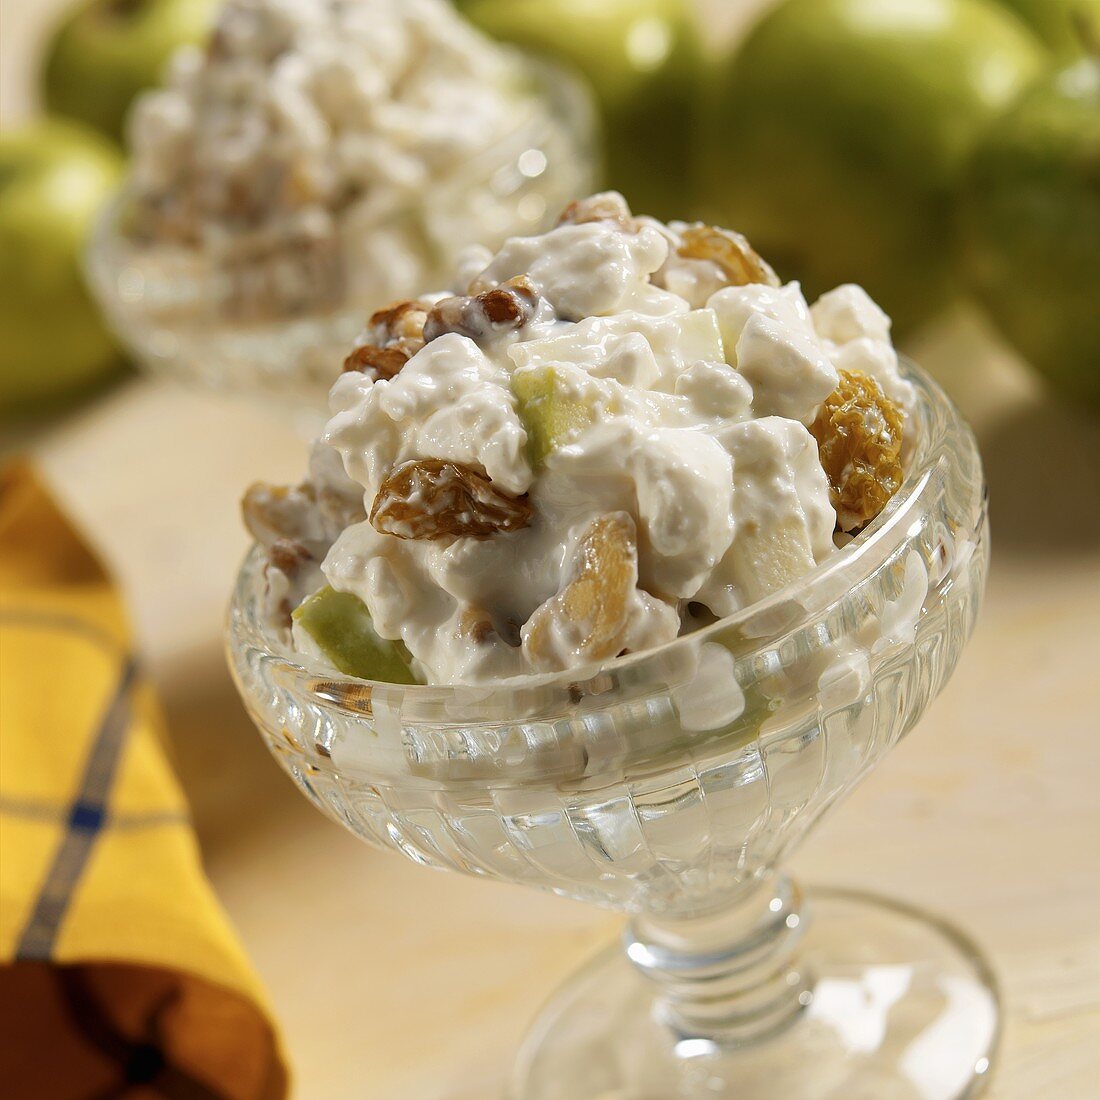 Cottage Cheese with Golden Raisins, Apples and Walnuts in Small Bowls